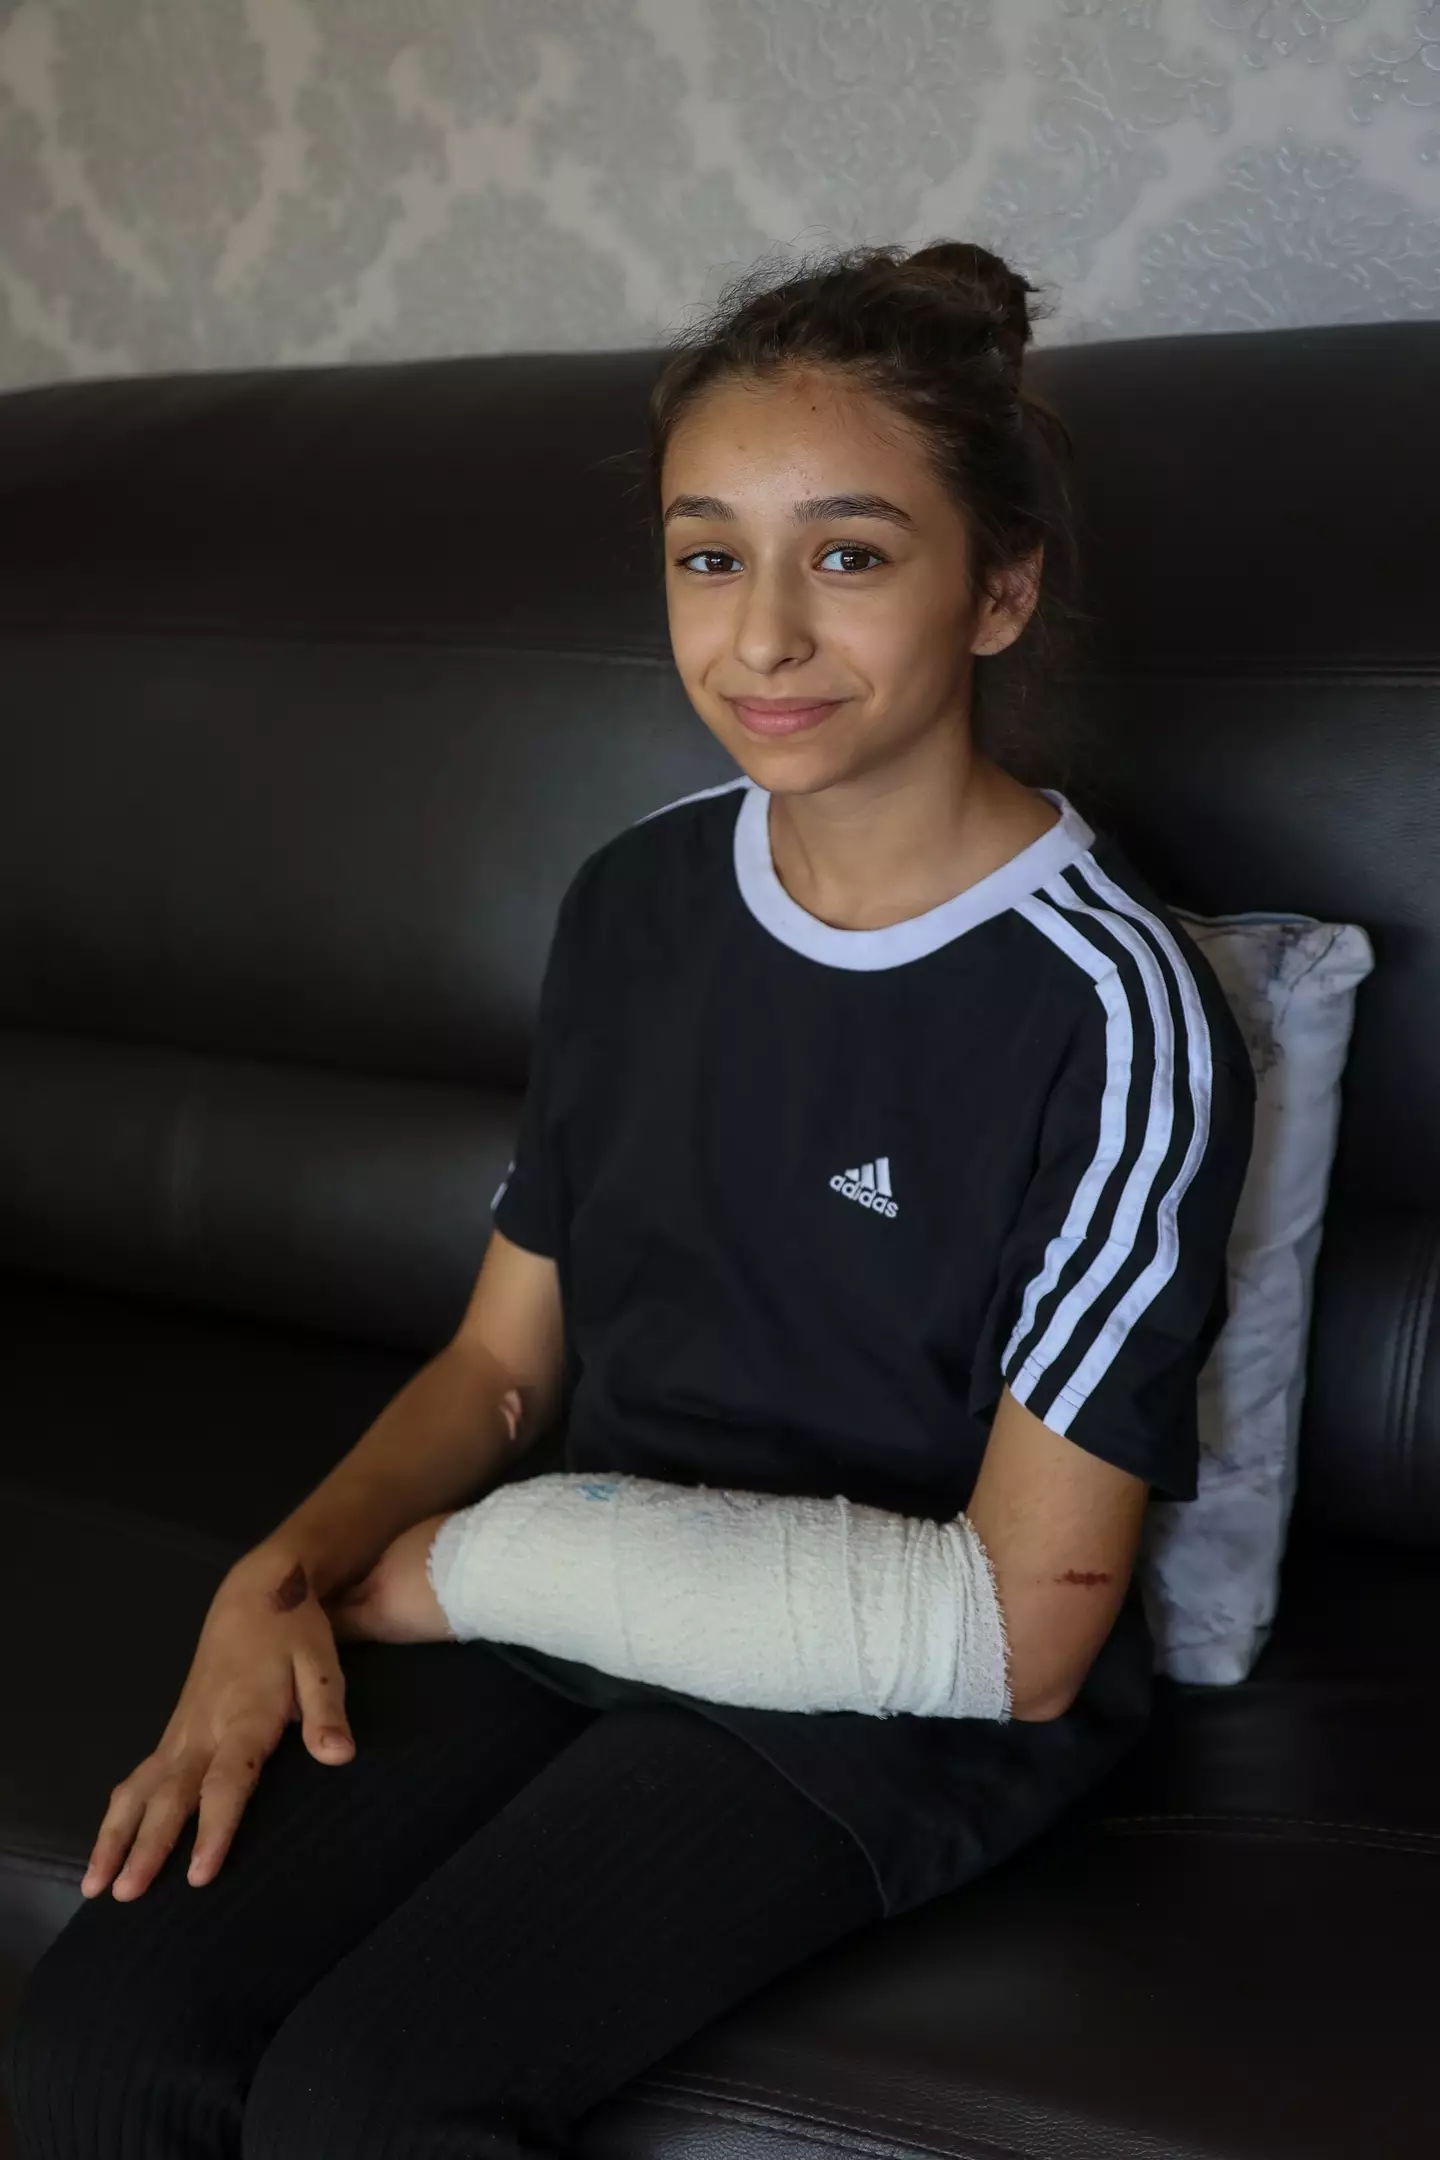 Ana Paun, 11, was left with injuries to her arm from the dog attack.